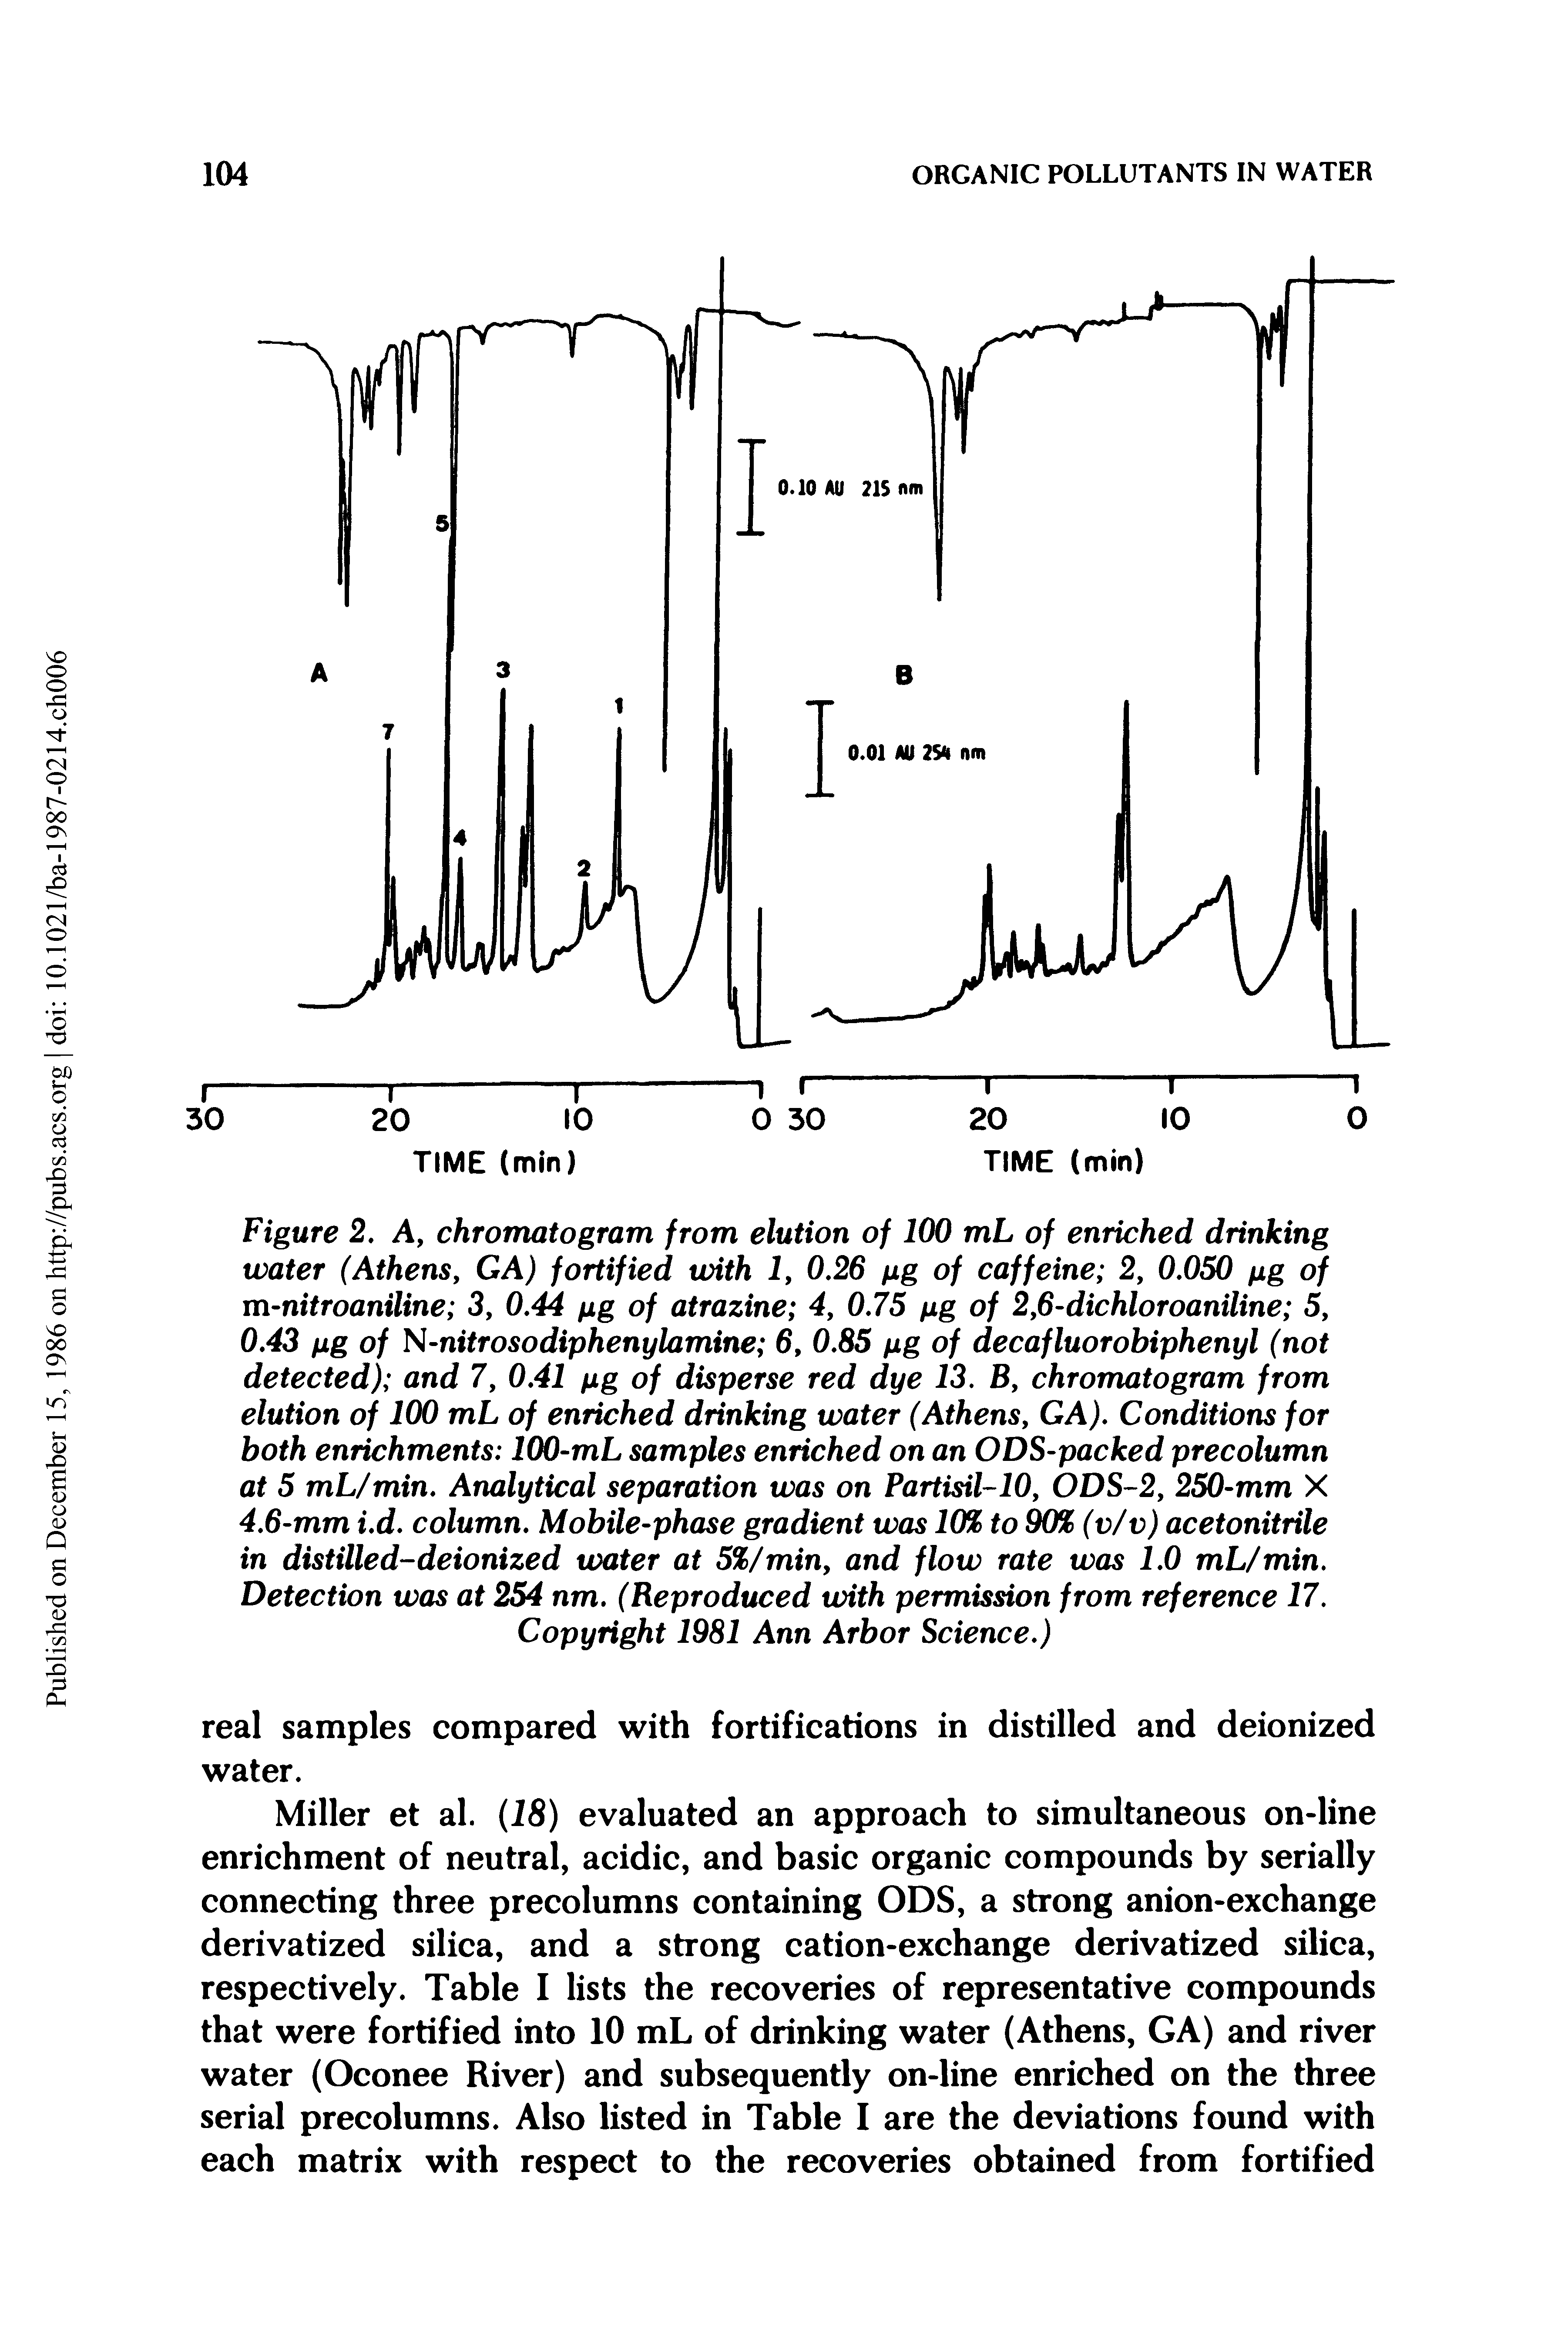 Figure 2. A, chromatogram from elution of 100 mL of enriched drinking water (Athens, GA) fortified with 1, 0.26 pg of caffeine 2, 0.050 gig of m-nitroaniline 3, 0.44 pg of atrazine 4, 0.75 pg of 2,6-dichloroaniline 5, 0.43 fig of N-nitrosodiphenylamine 6, 0.85 pg of decafluorobiphenyl (not detected) and 7, 0.41 pg of disperse red dye 13. B, chromatogram from elution of 100 mL of enriched drinking water (Athens, GA). Conditions for both enrichments 100-mL samples enriched on an ODS-packed precolumn at 5 mL/min. Analytical separation was on Partisil-10, ODS-2, 250-mm X 4.6-mm i.d. column. Mobile-phase gradient was 10% to 90% (v/v) acetonitrile in distilled-deionized water at 5%/min, and flow rate was 1.0 mL/min. Detection was at 254 nm. (Reproduced with permission from reference 17.